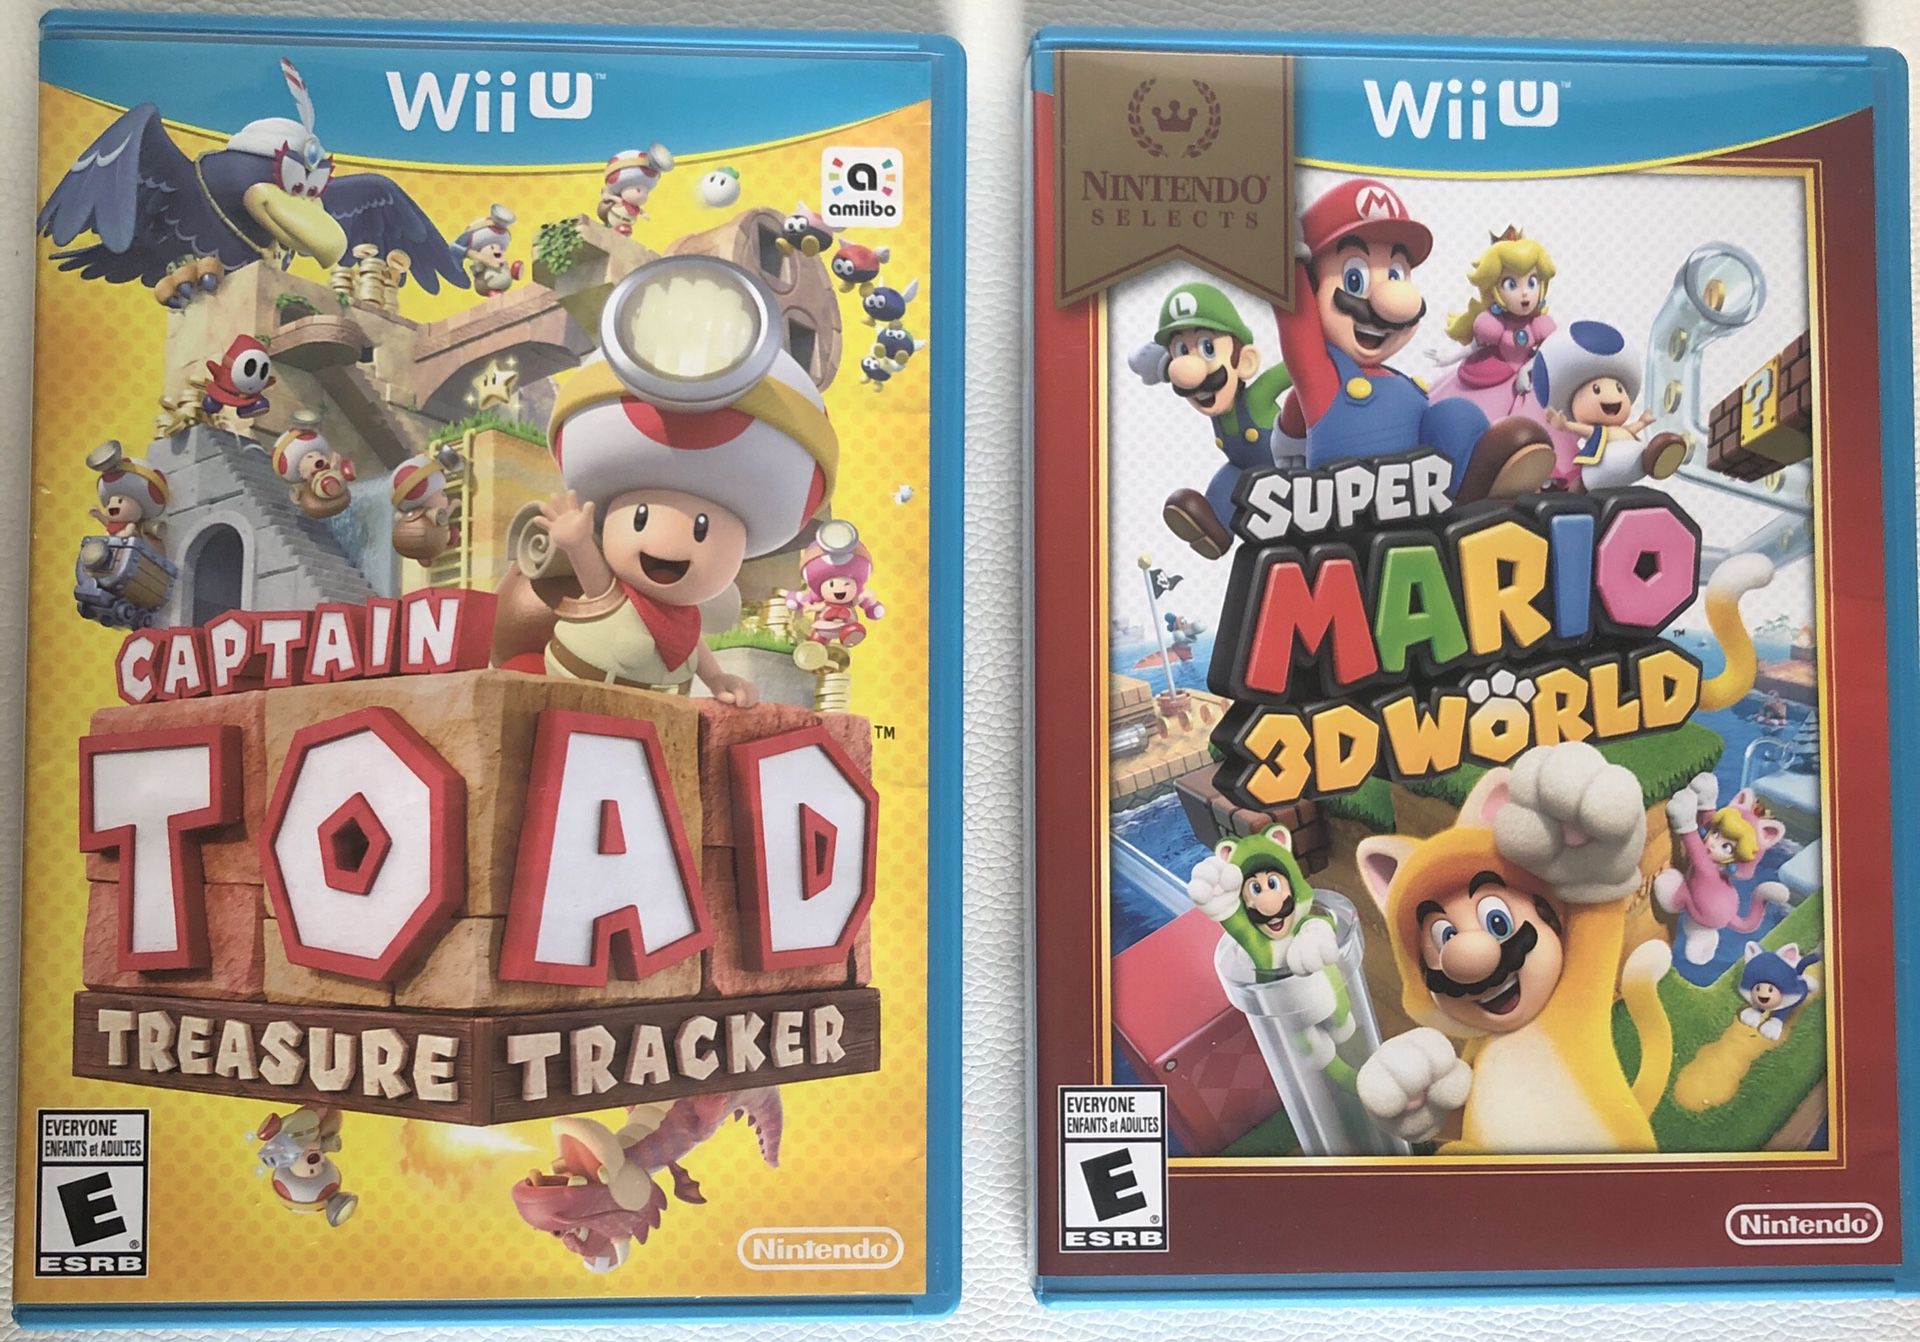 Super Mario 3D World and Captain Toad for Wii U